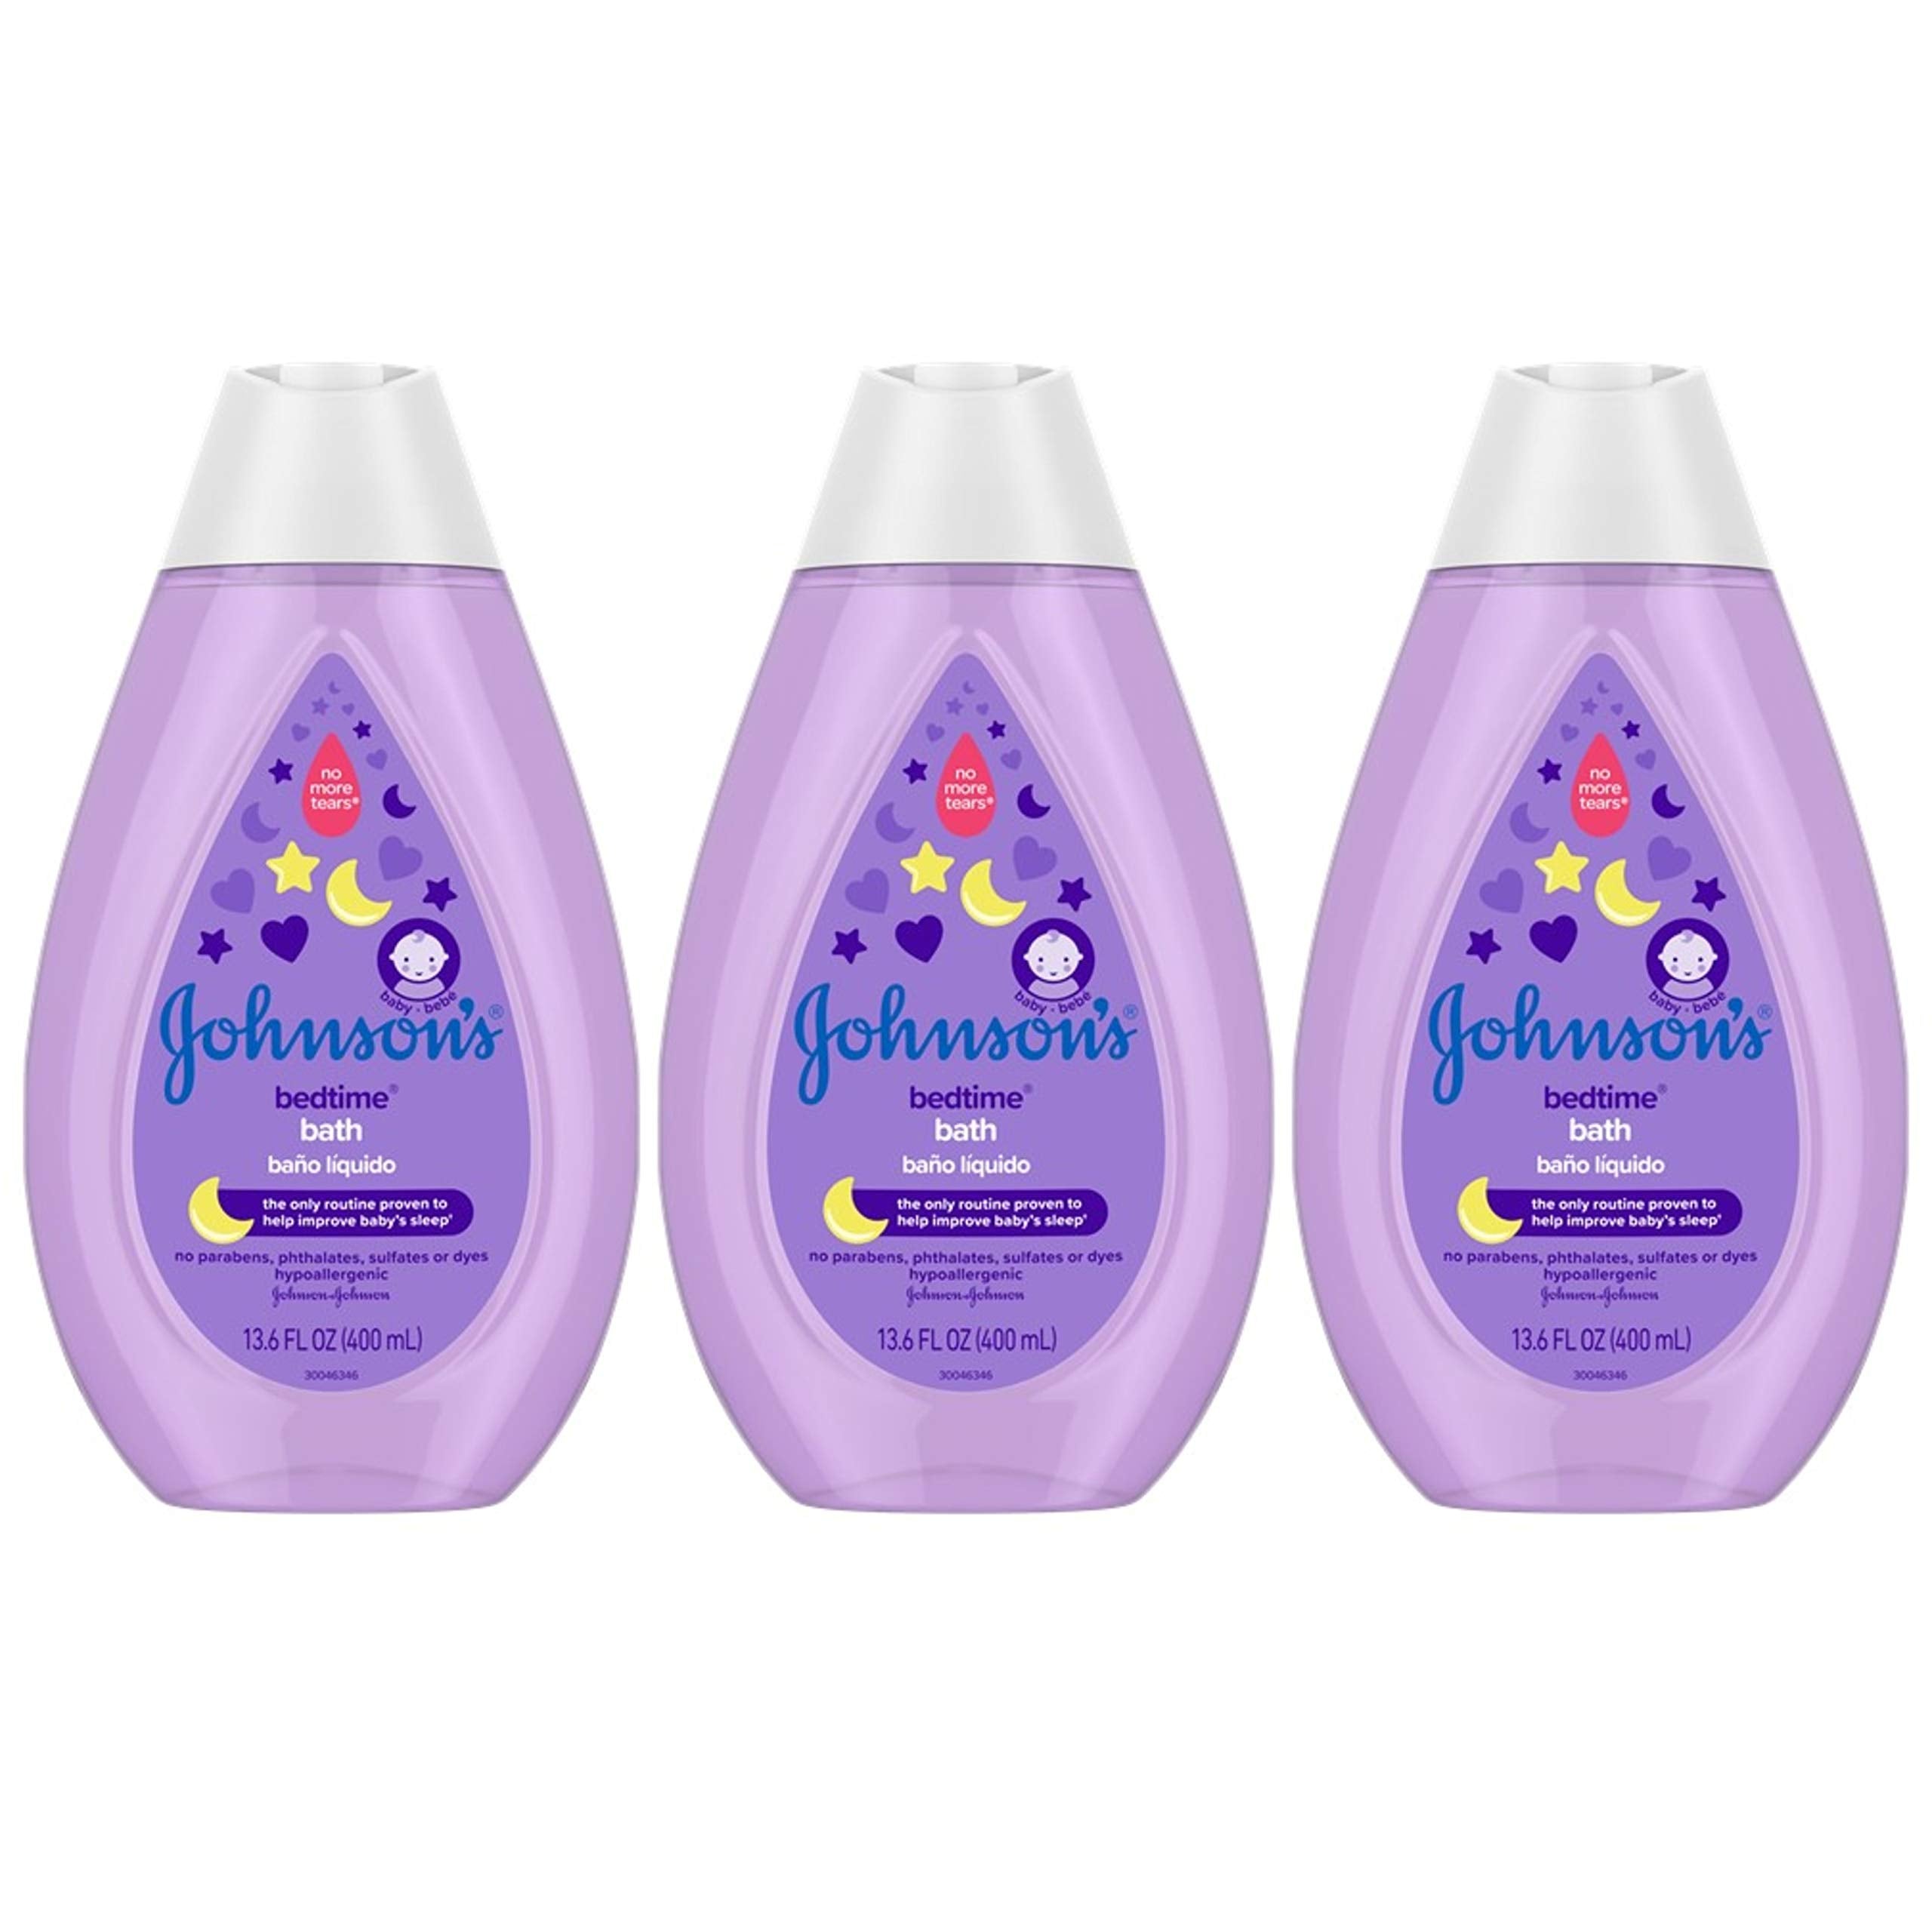 Johnson's Baby TearFree Bedtime Bath with Soothing NaturalCalm fl, Purple, Aromas, 13.6 Fl Oz (Pack of 3)